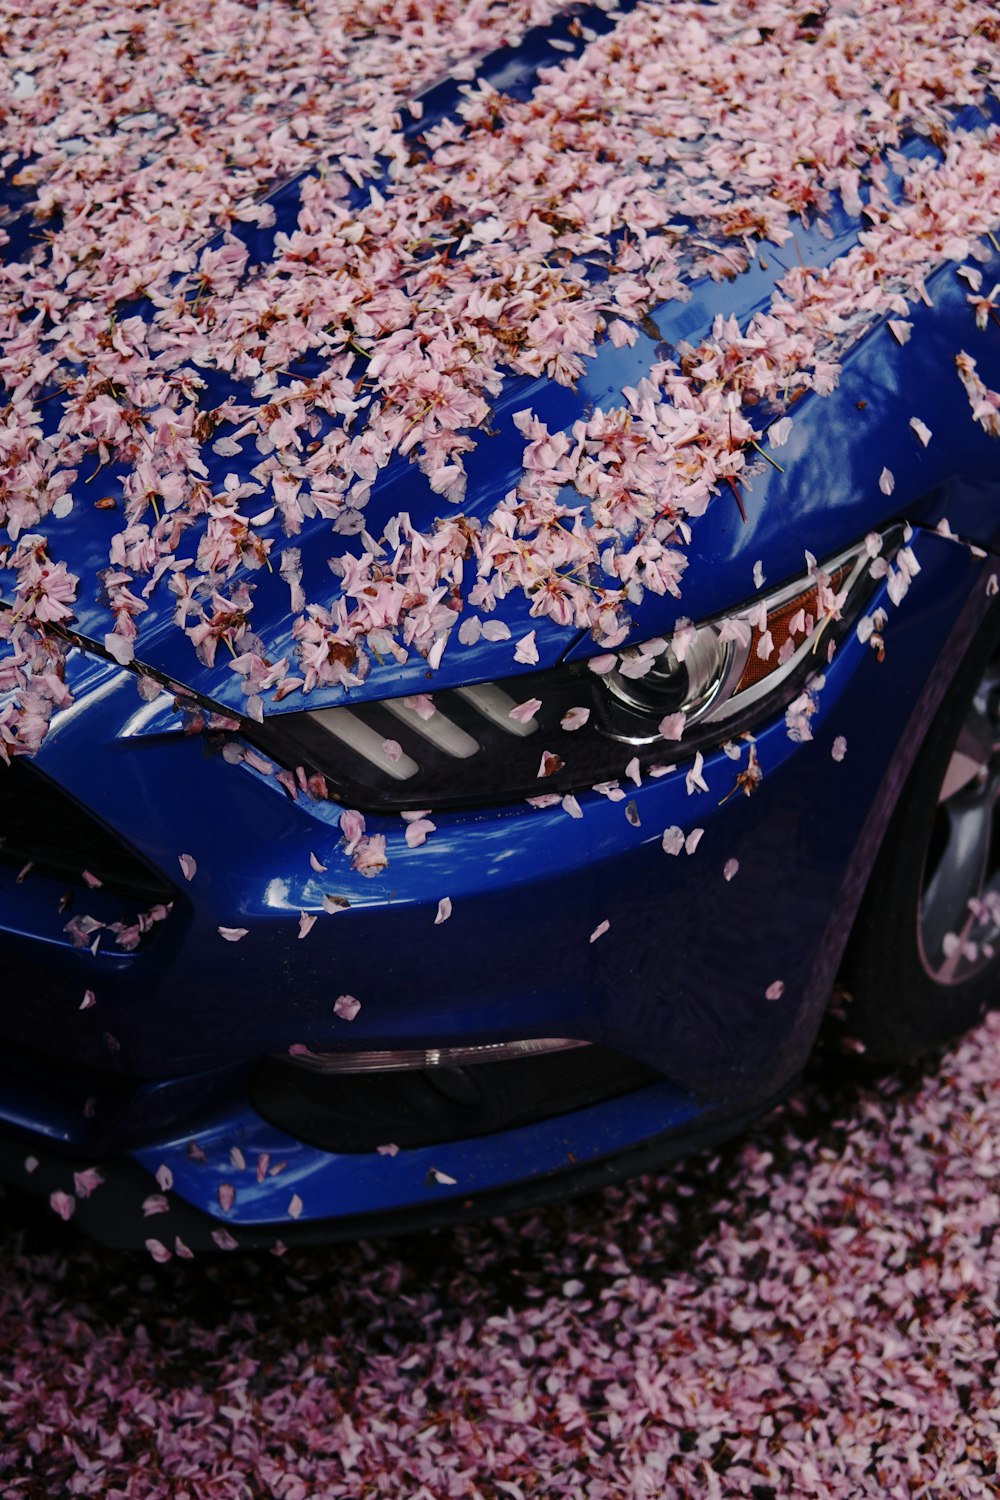 a blue car covered in pink flowers